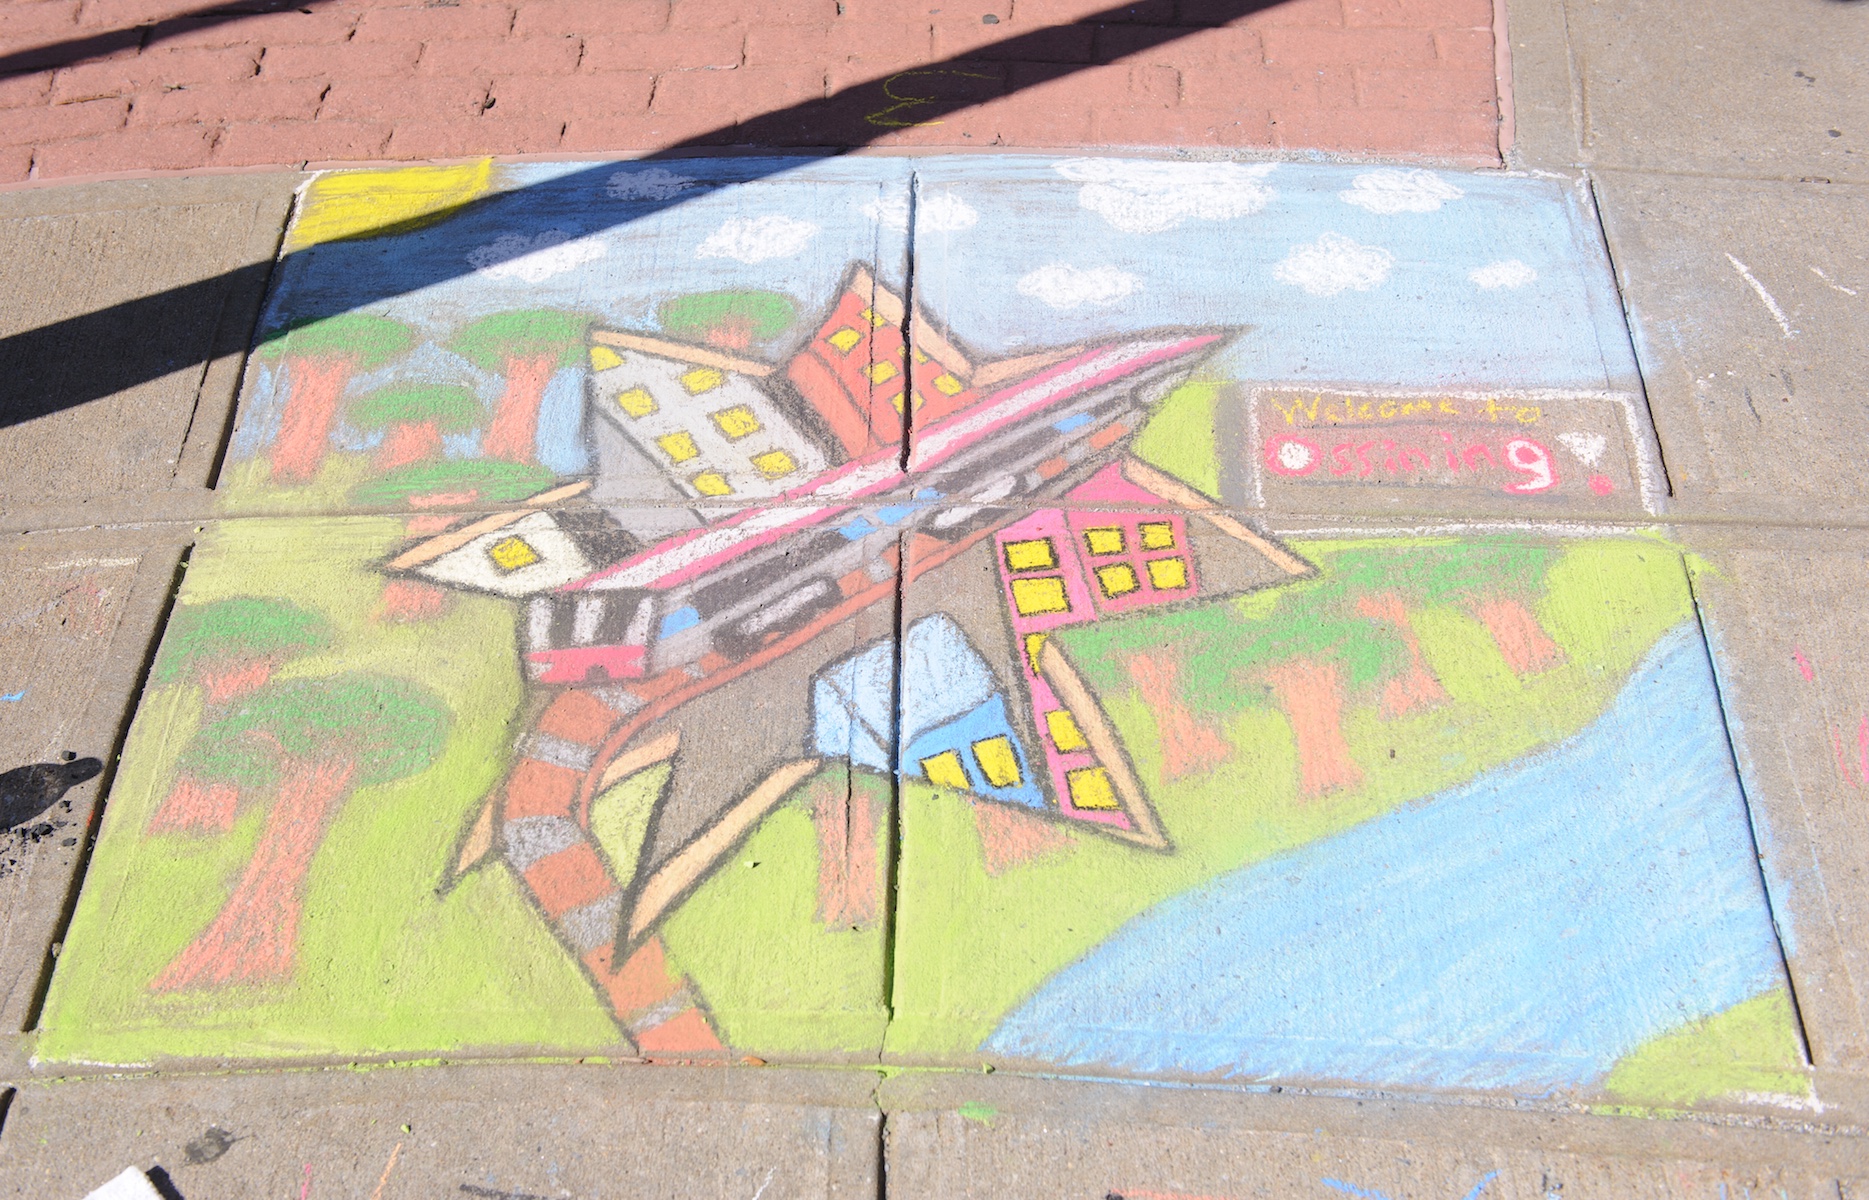 Local artists Julian Negron and Alex Quishpi received second place at the Village of Ossining’s second annual Chalk It Up! festival held recently at Market Square. Photo by: Michael Lee.